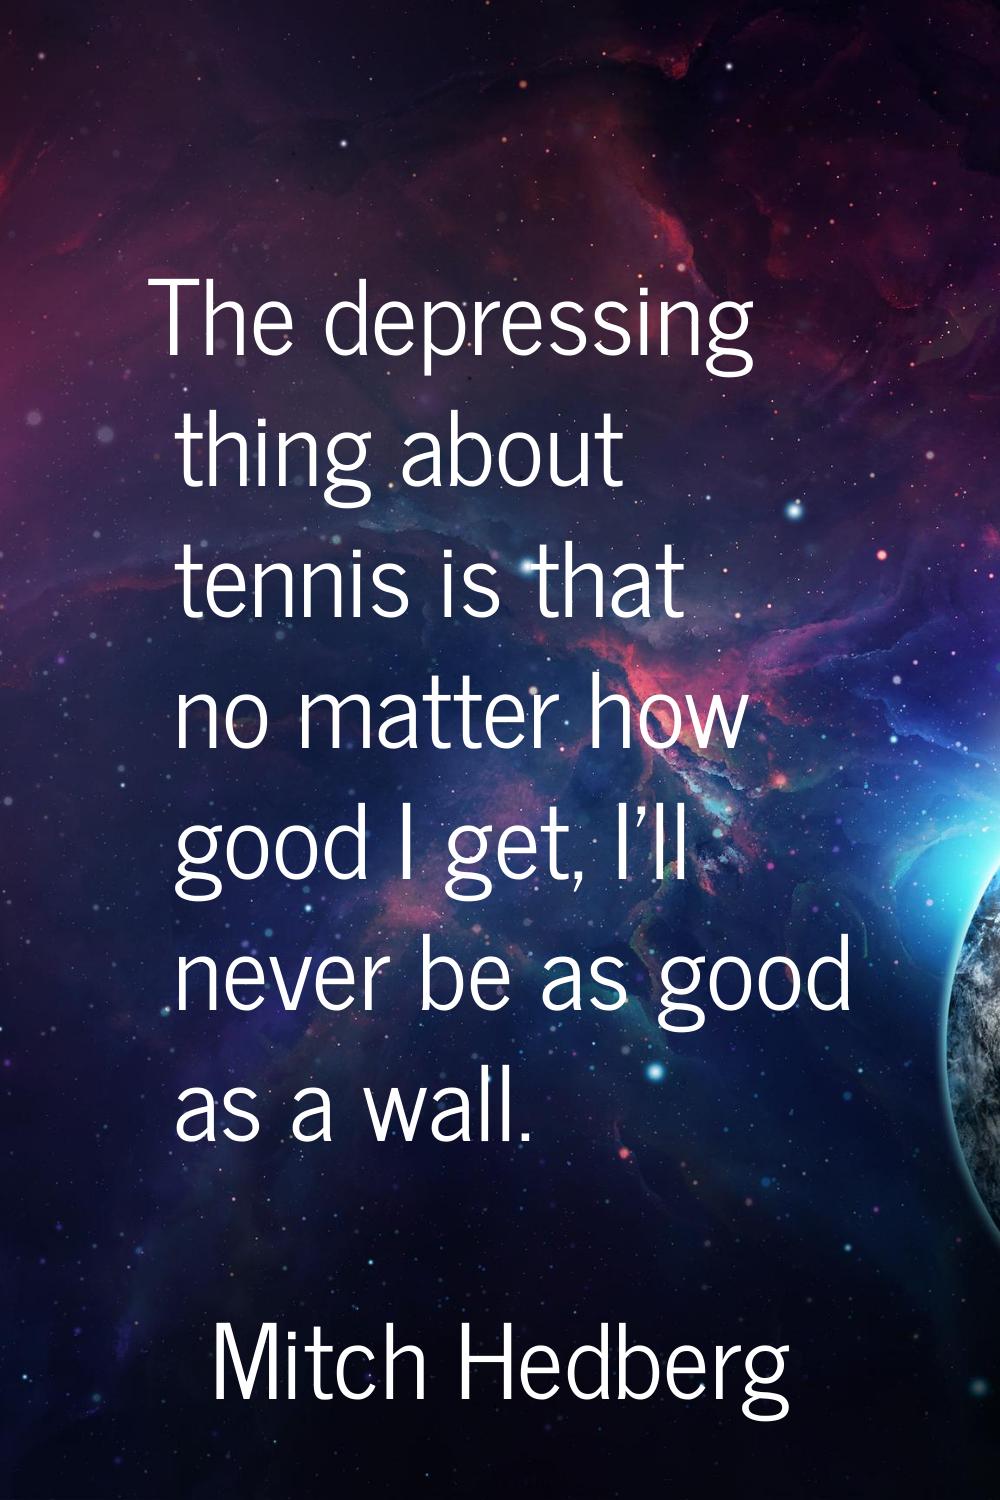 The depressing thing about tennis is that no matter how good I get, I'll never be as good as a wall